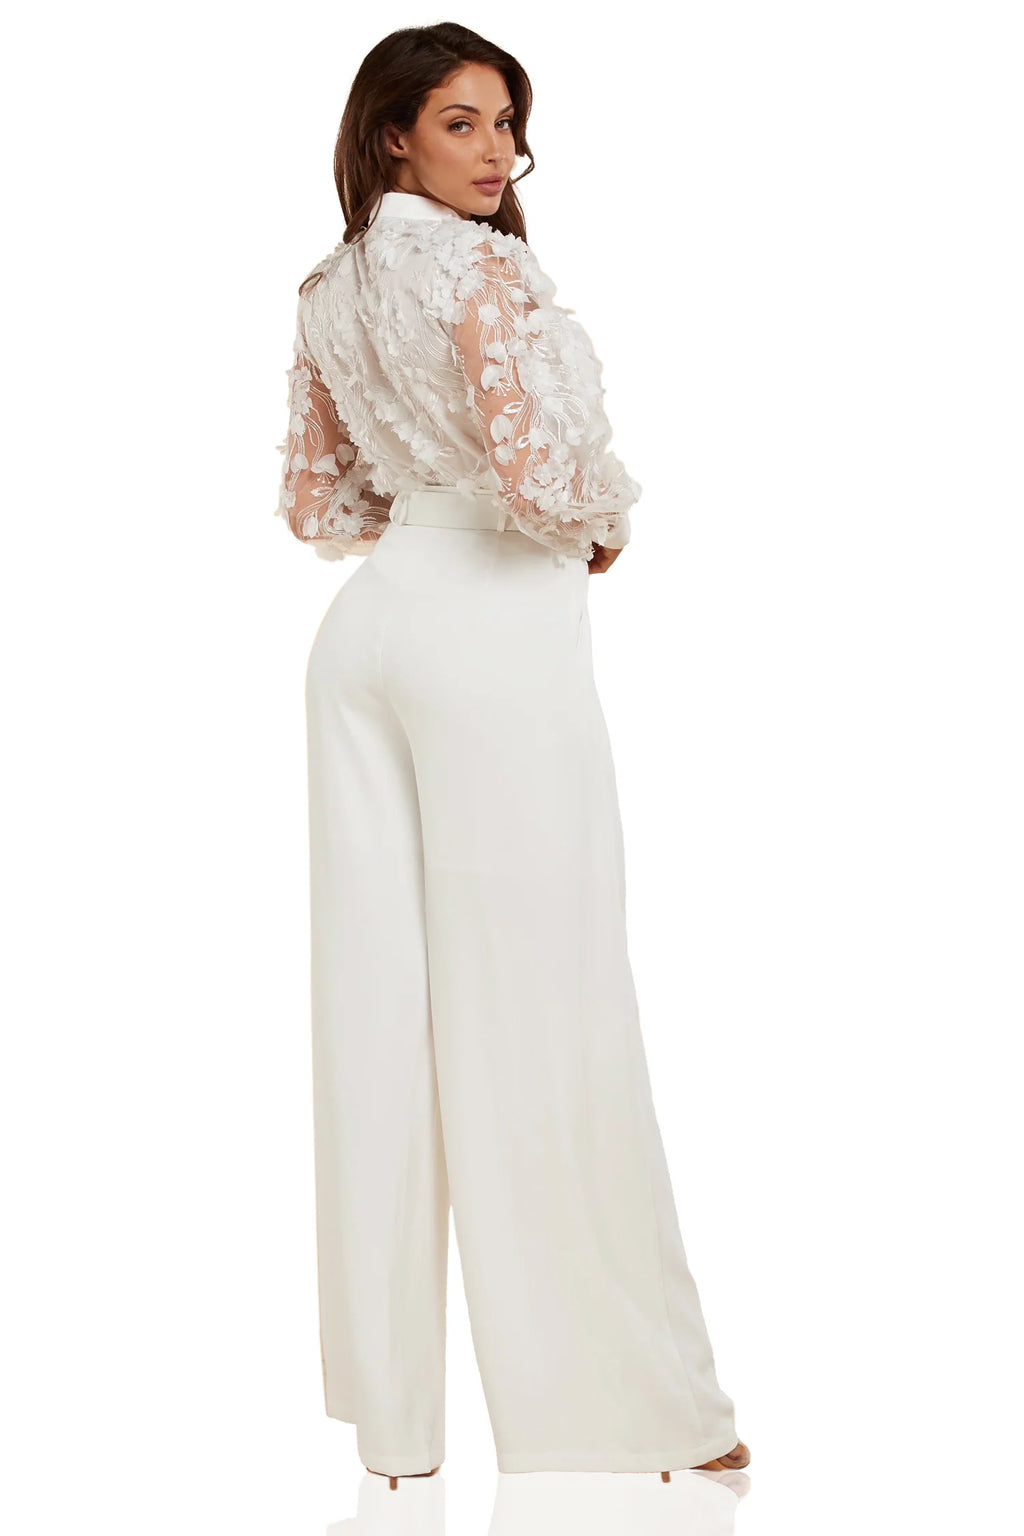 WHITE LACE DETAIL FLOER TOP AND PANT SET - PRIVILEGE 